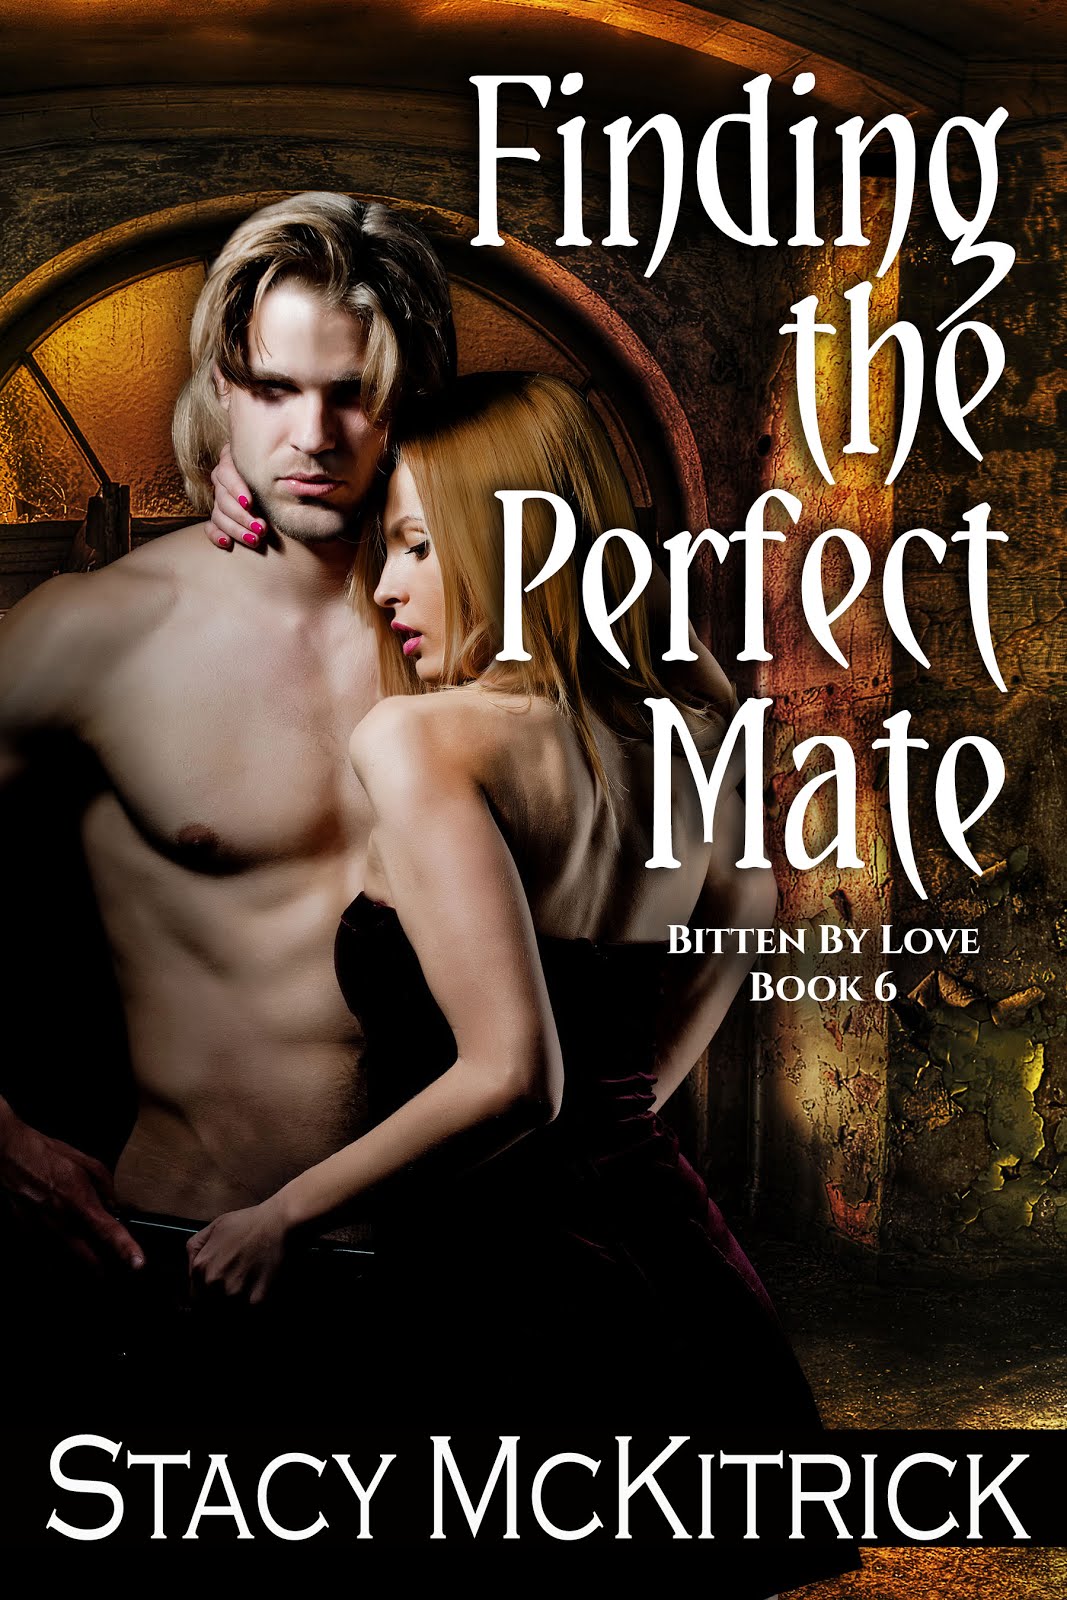 Book 6 in the Bitten by Love Series